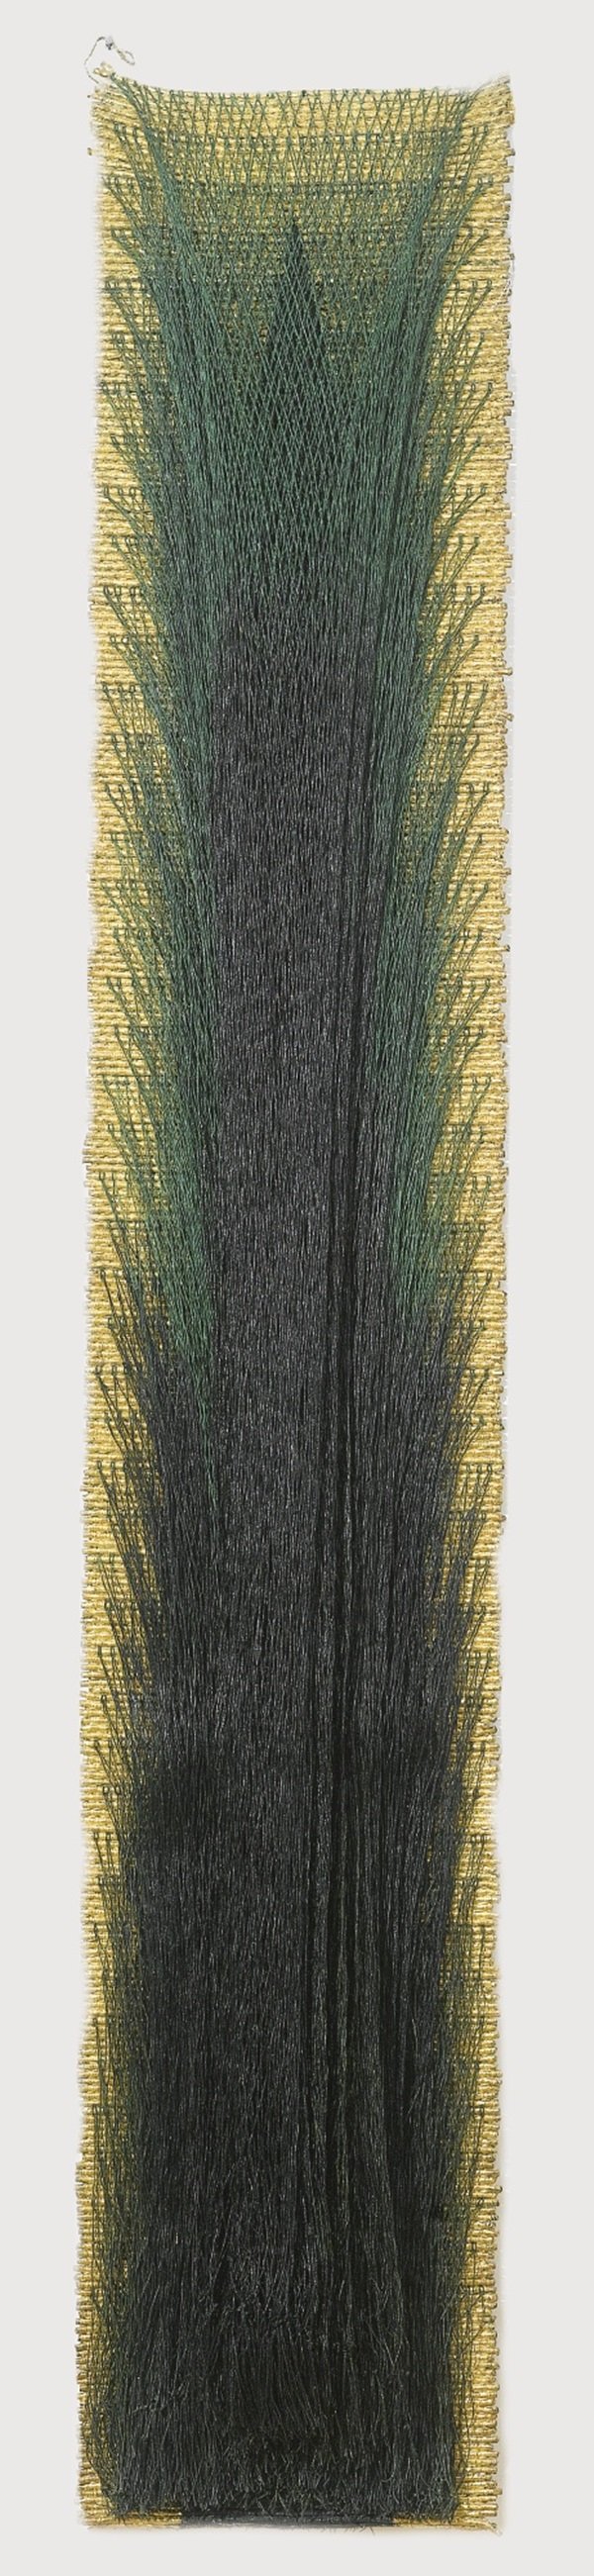 Olga de Amaral's  Lienzo Ceremonial 11 (1989) sold for $125,000 at Sotheby's last month (Estimate: $40–60,000). Image: Courtesy of Sotheby's. 